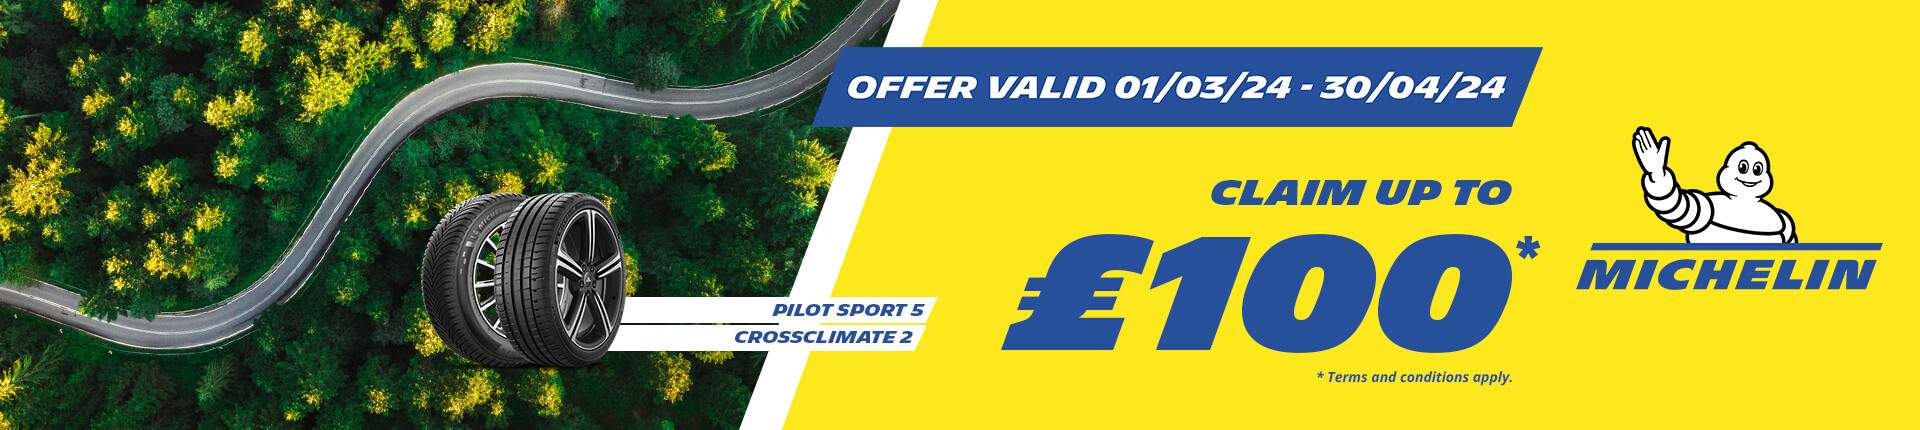 Michelin Cash Back Offer - Home page